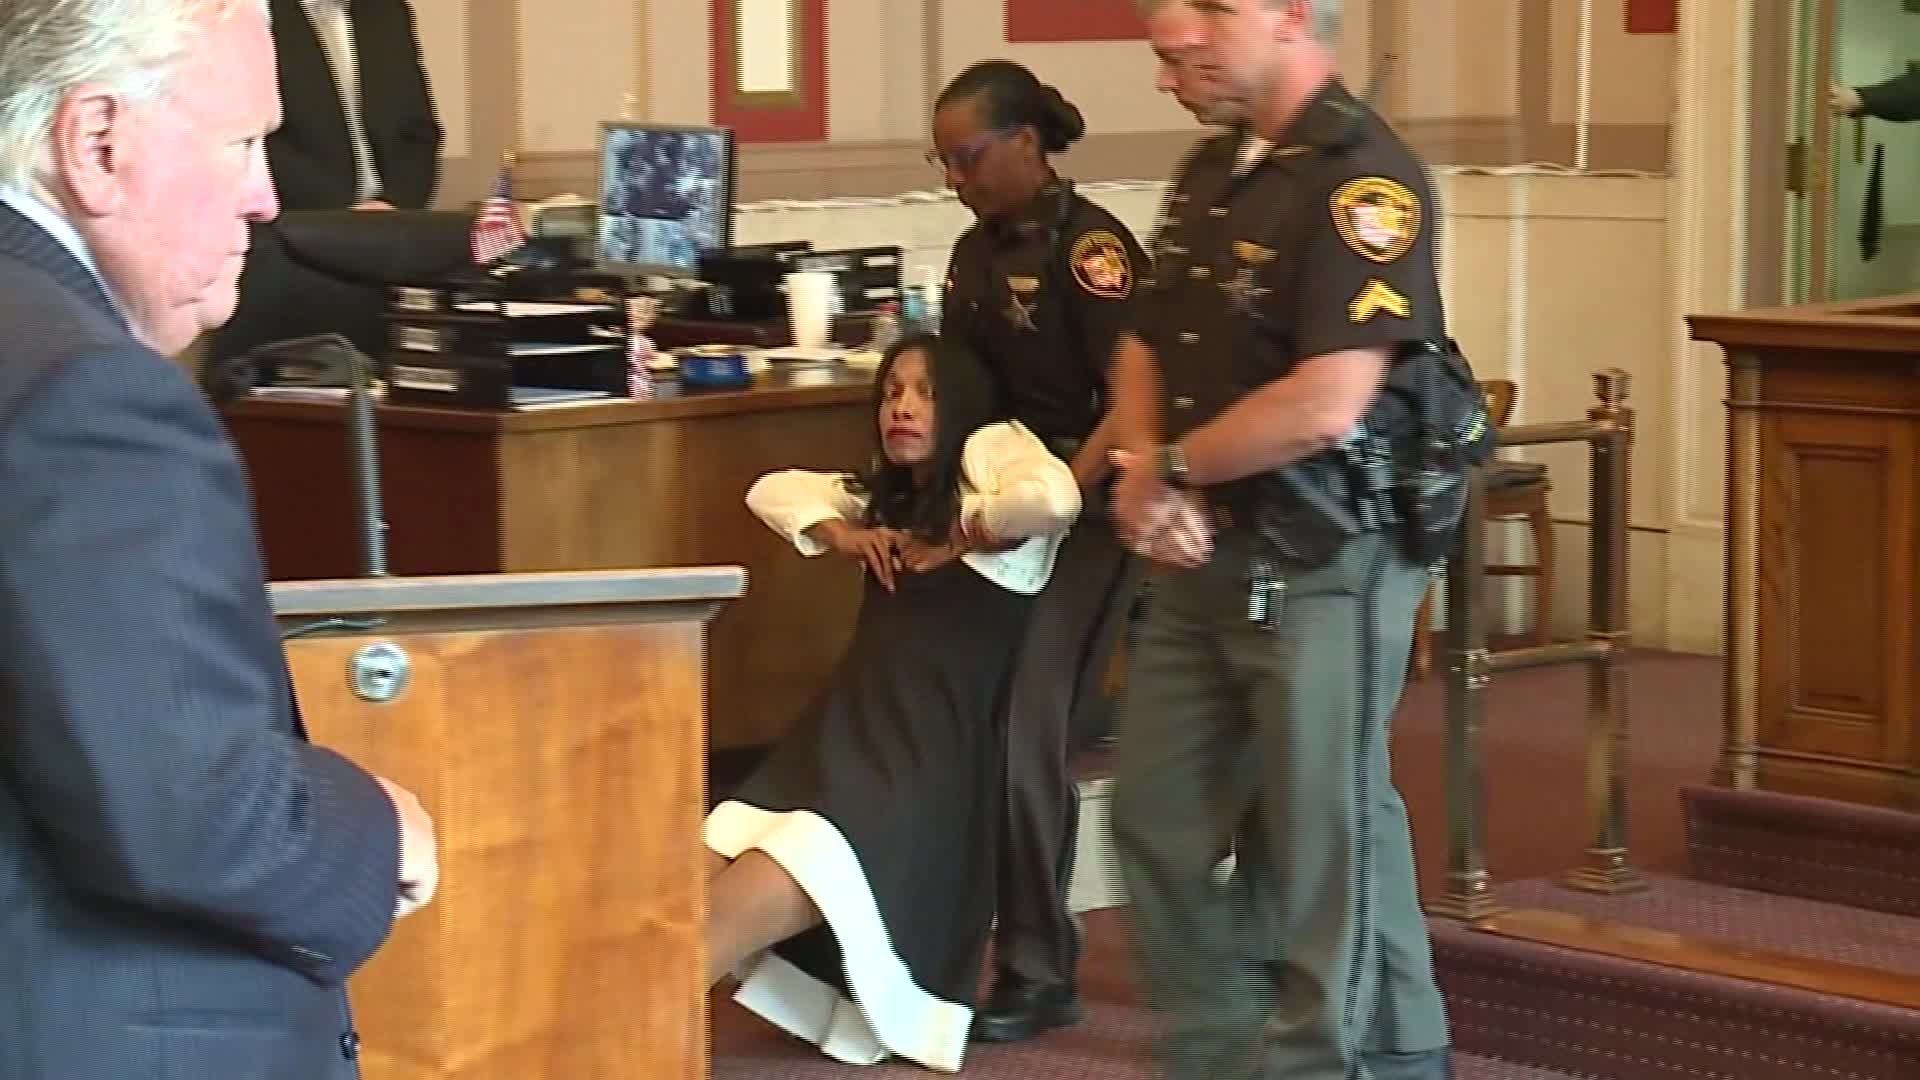 A former Ohio judge was dragged out of court after being sentenced to six m...